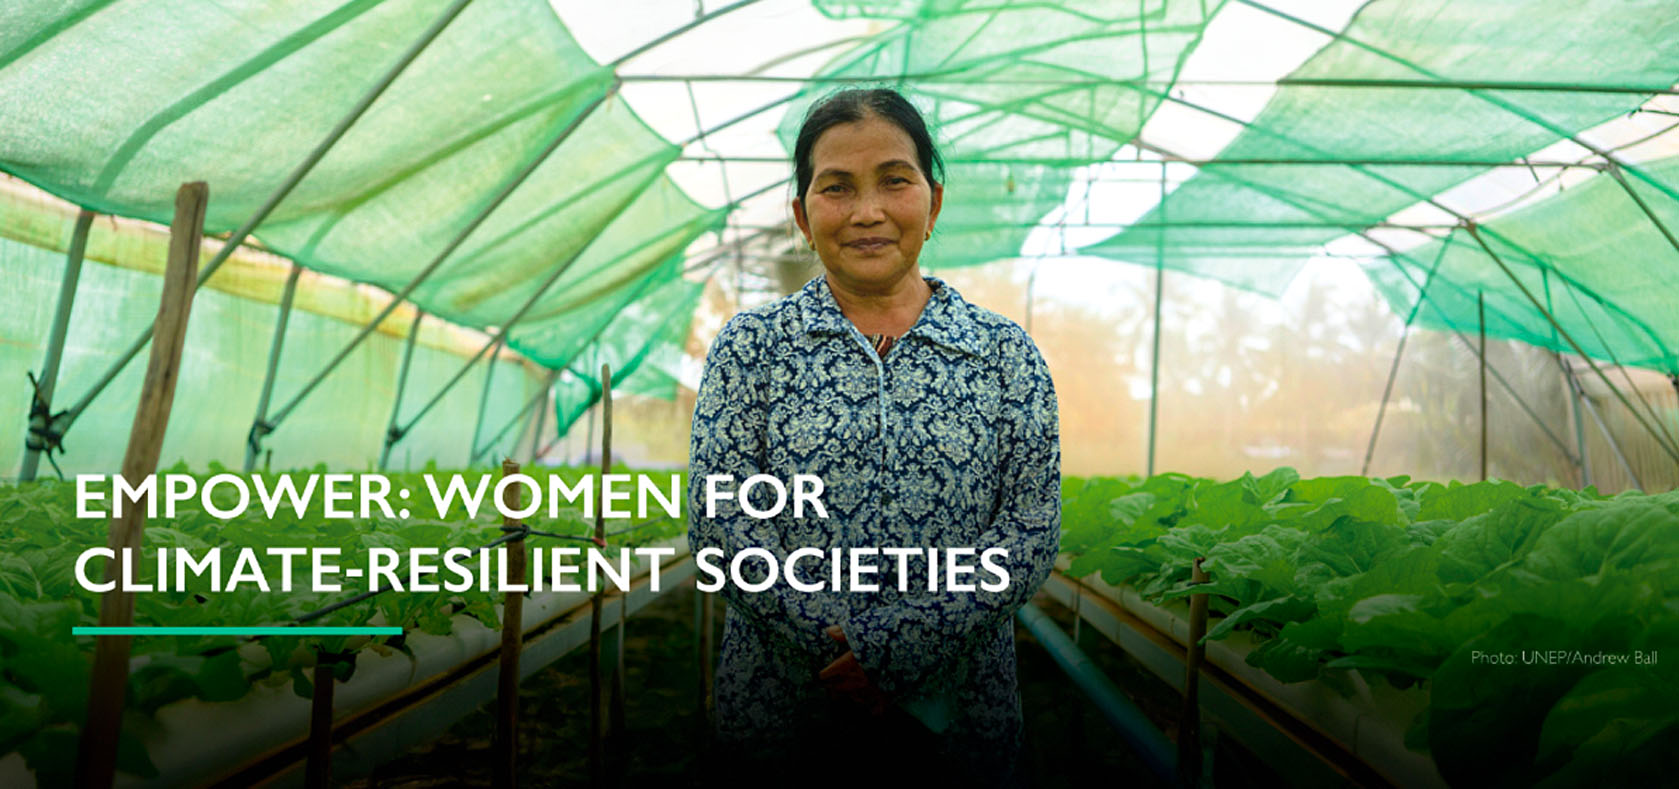 EmPower: Women for Climate-Resilient Societies